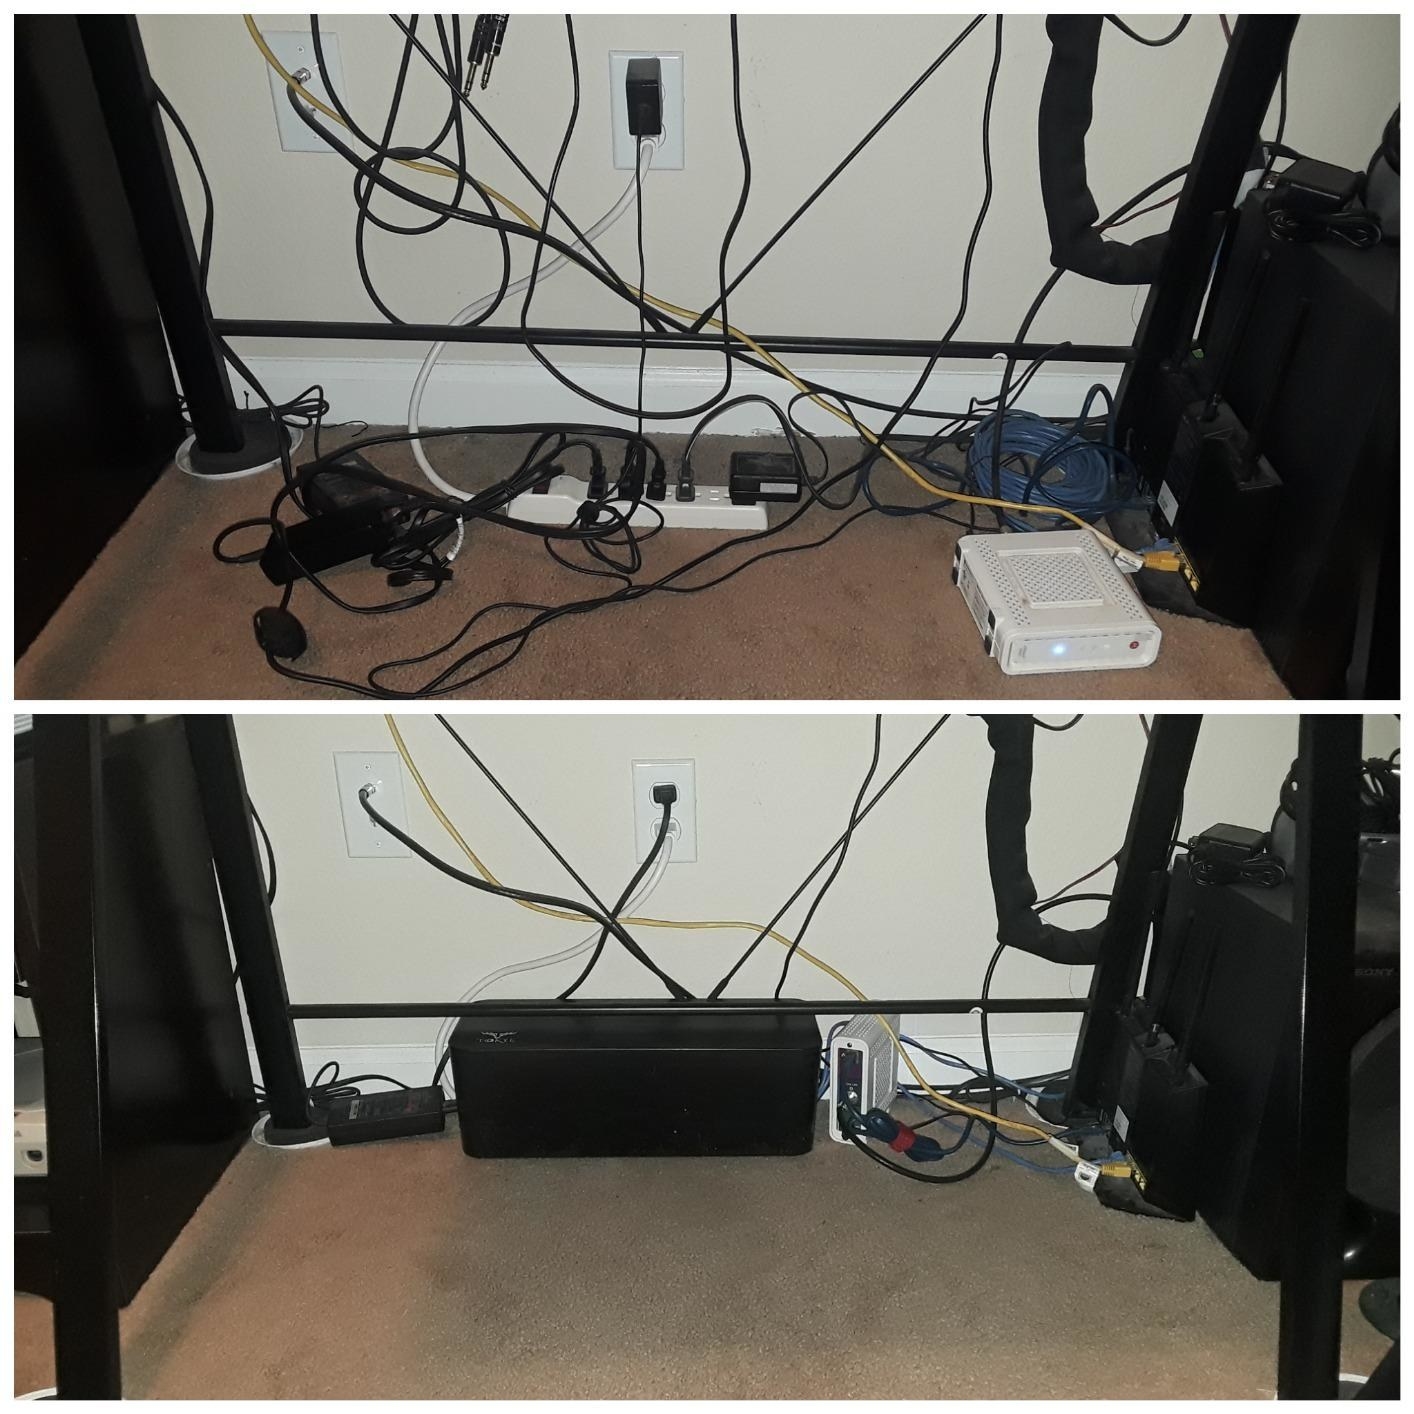 before photo of a mess of tangled cords plugged into a powerstrip and an outlet next to an after photo of a black box holding the powerstrip and cords and the area looks much neater